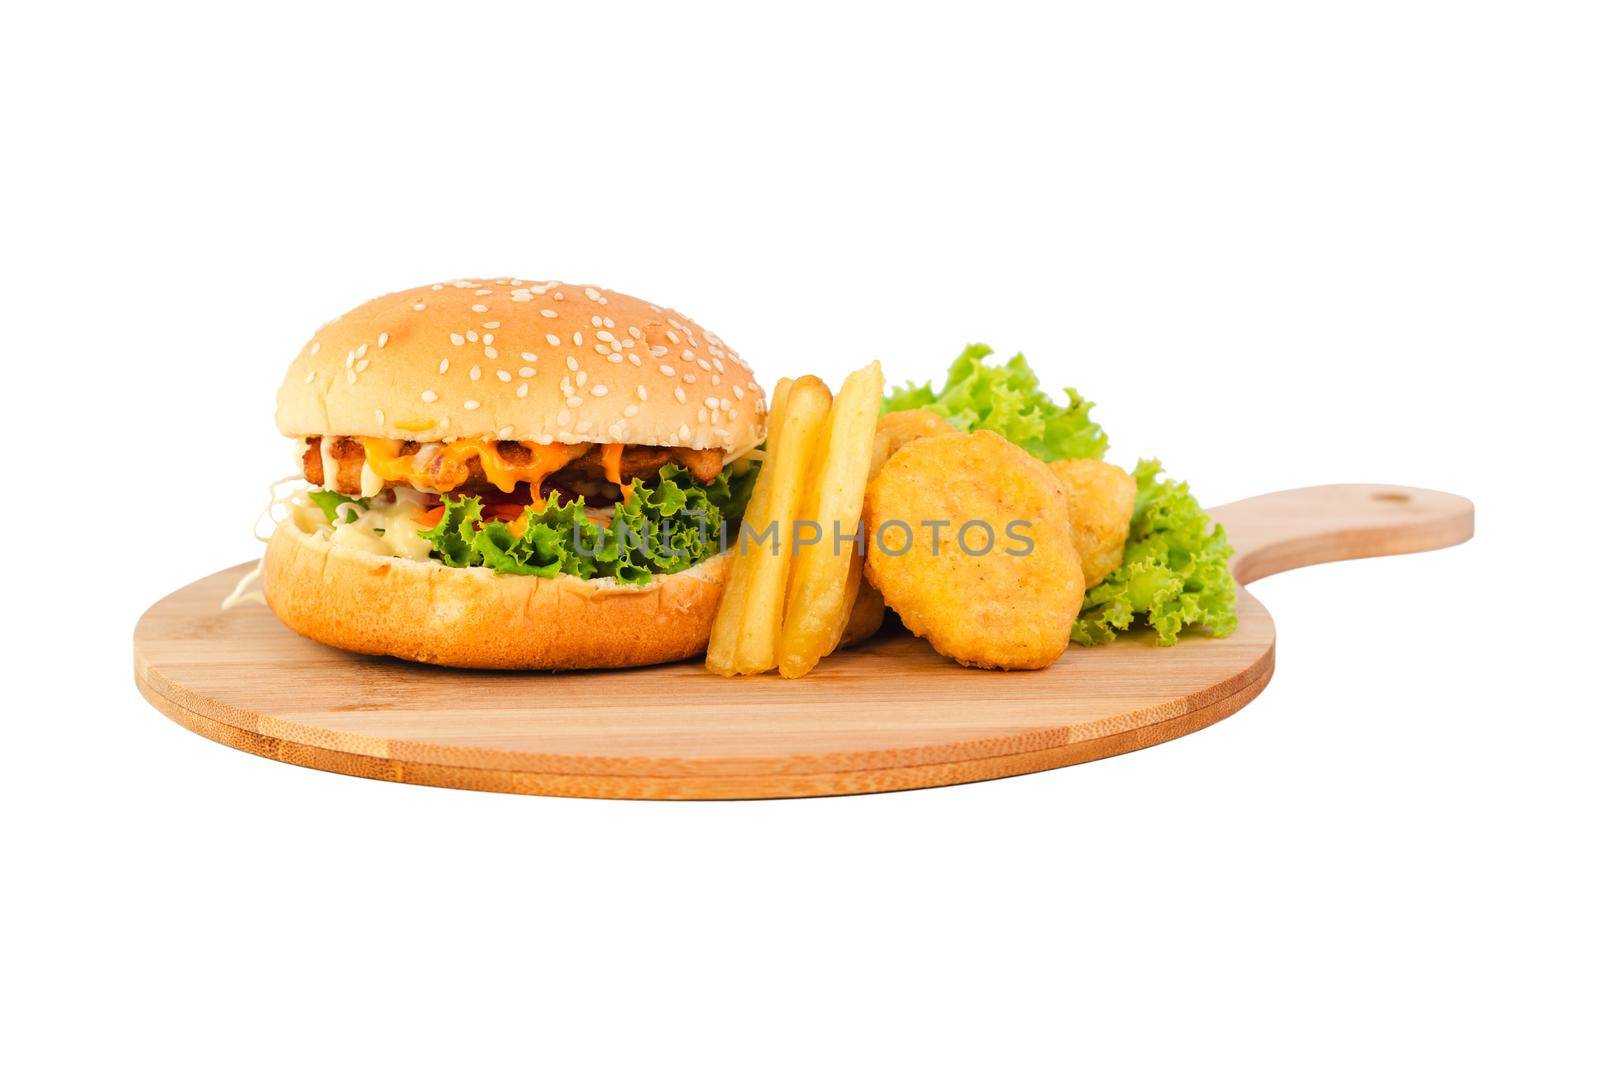 Chicken hamburger with nuggets and french fries on a wooden plate over white background by wattanaphob